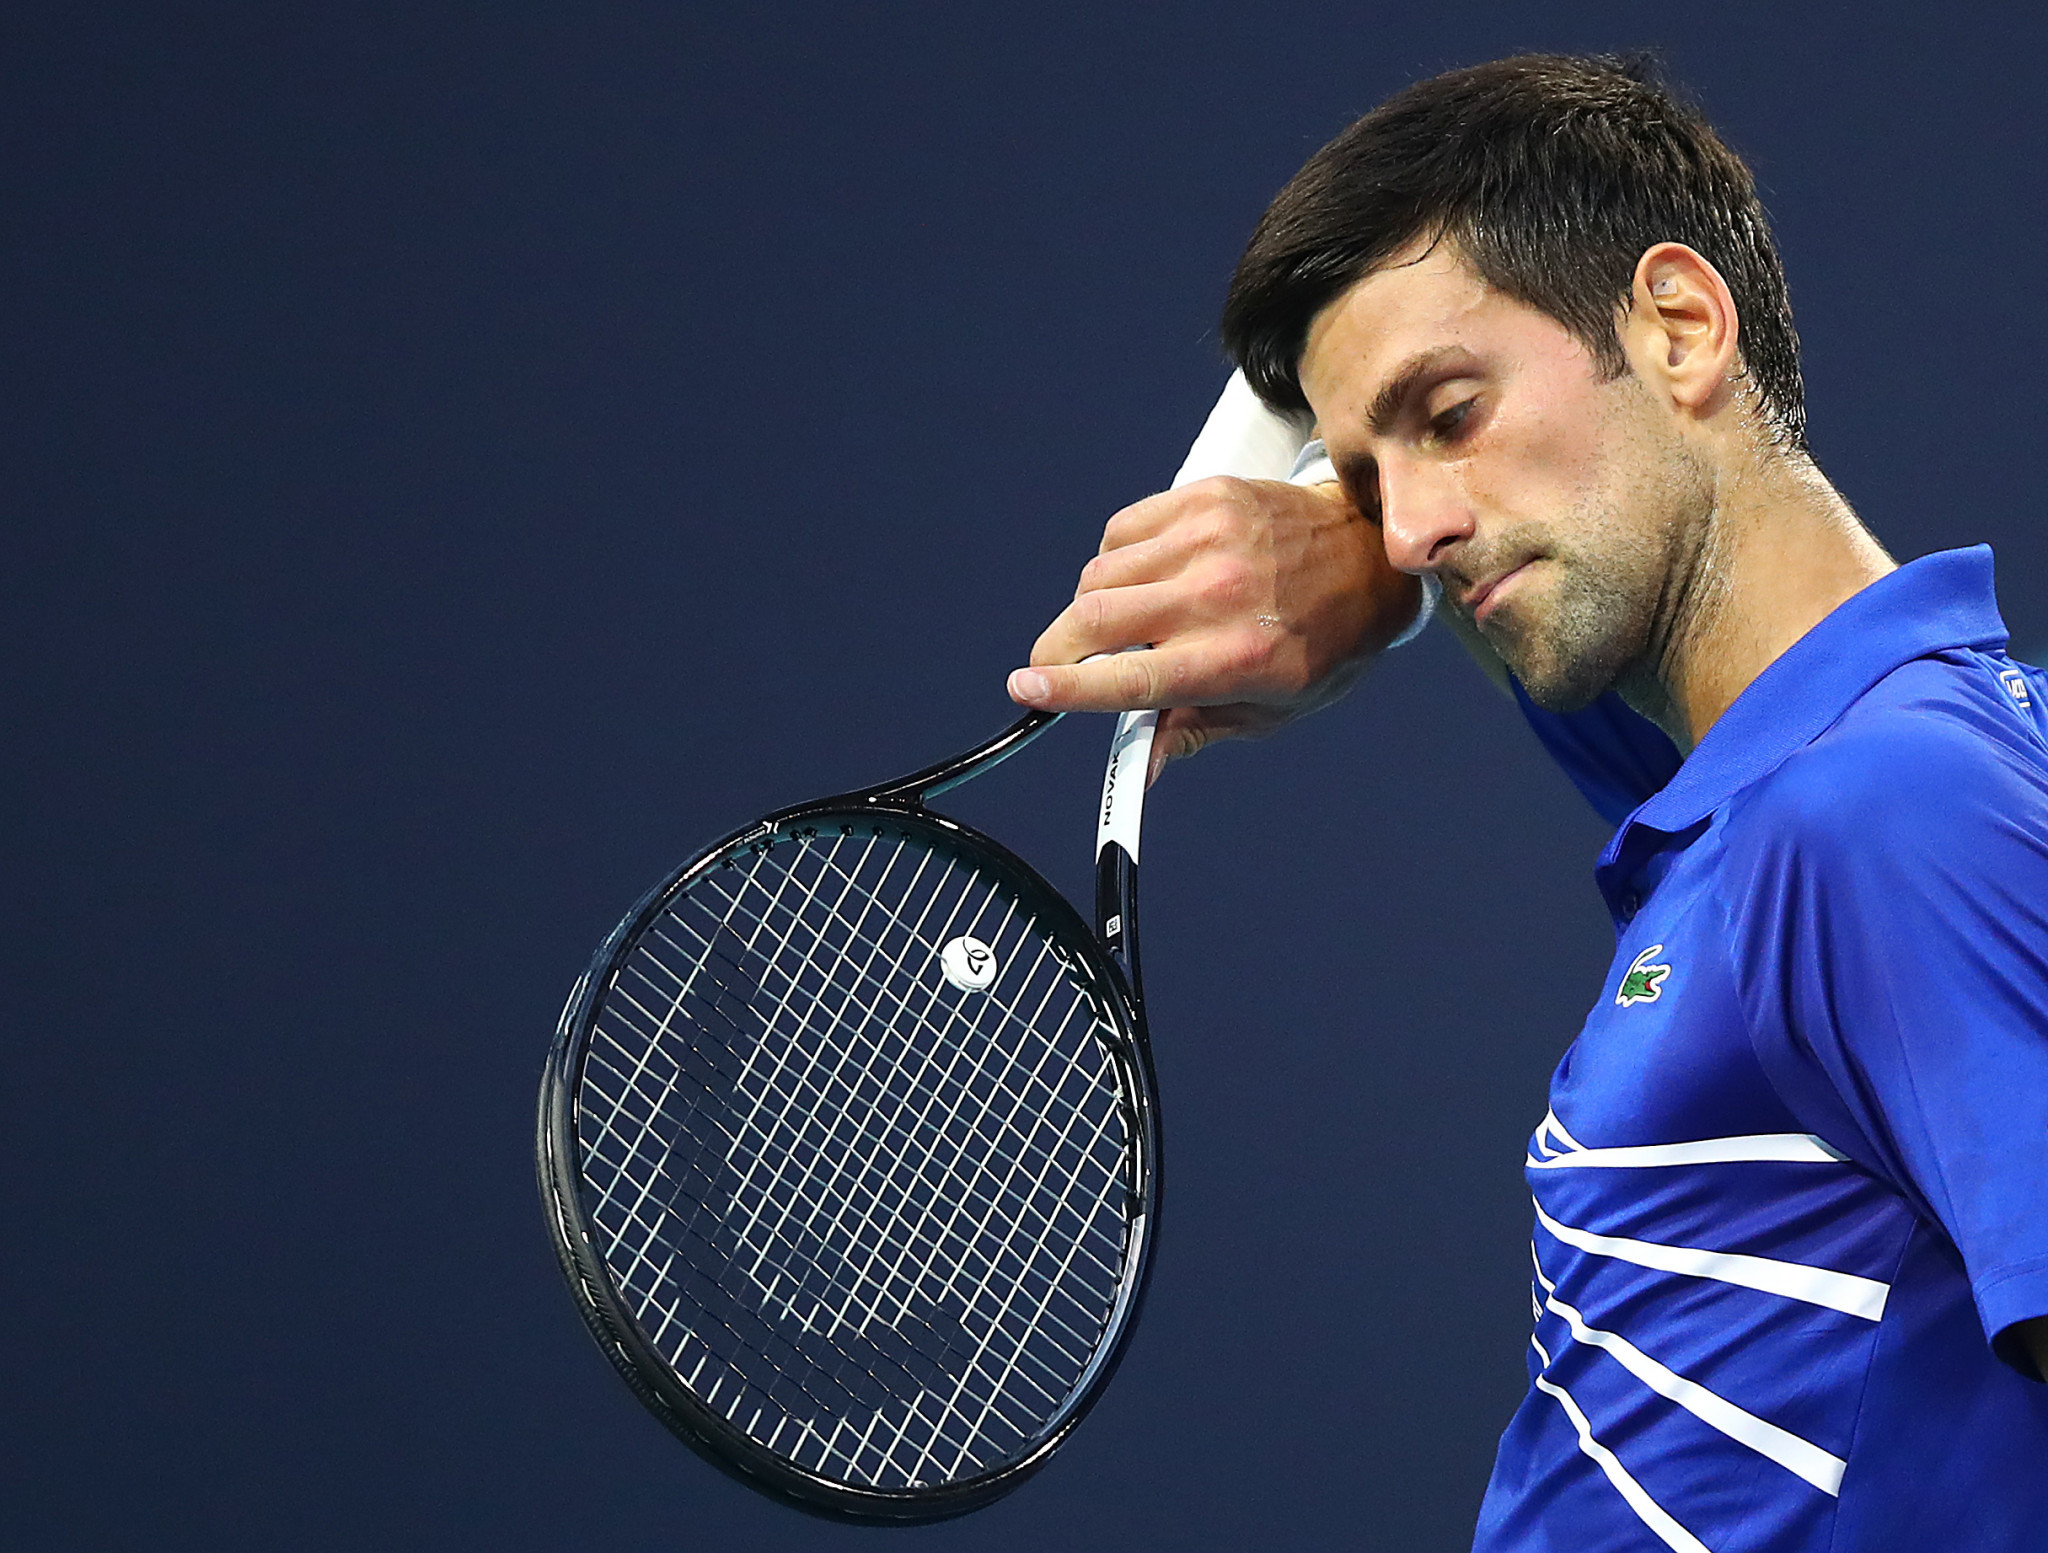 World number one Djokovic loses in fourth round of Miami Open 